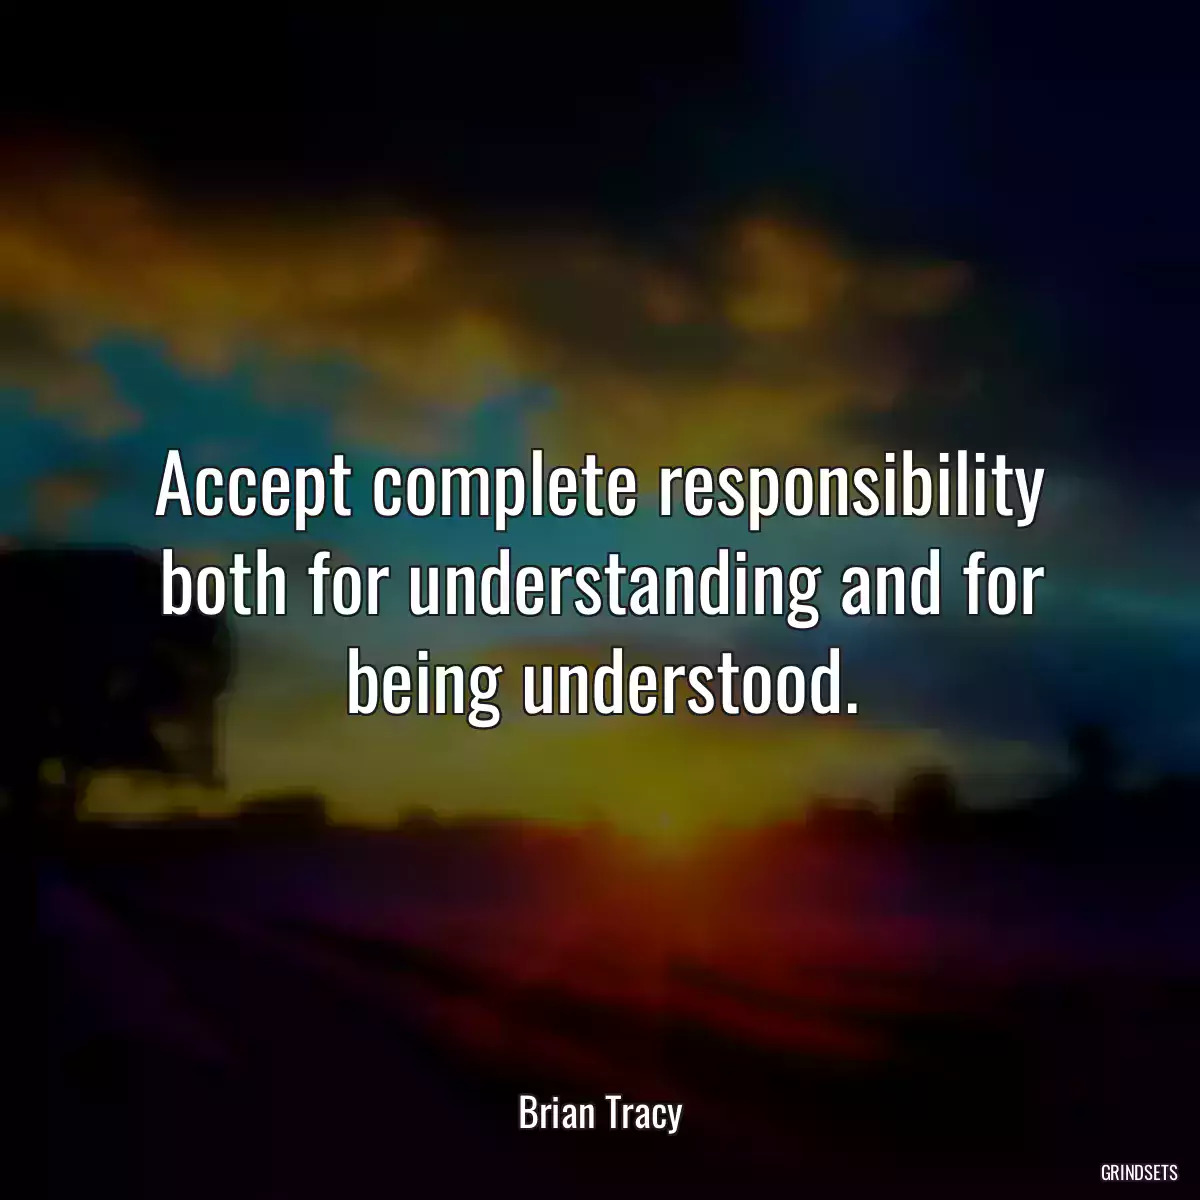 Accept complete responsibility both for understanding and for being understood.